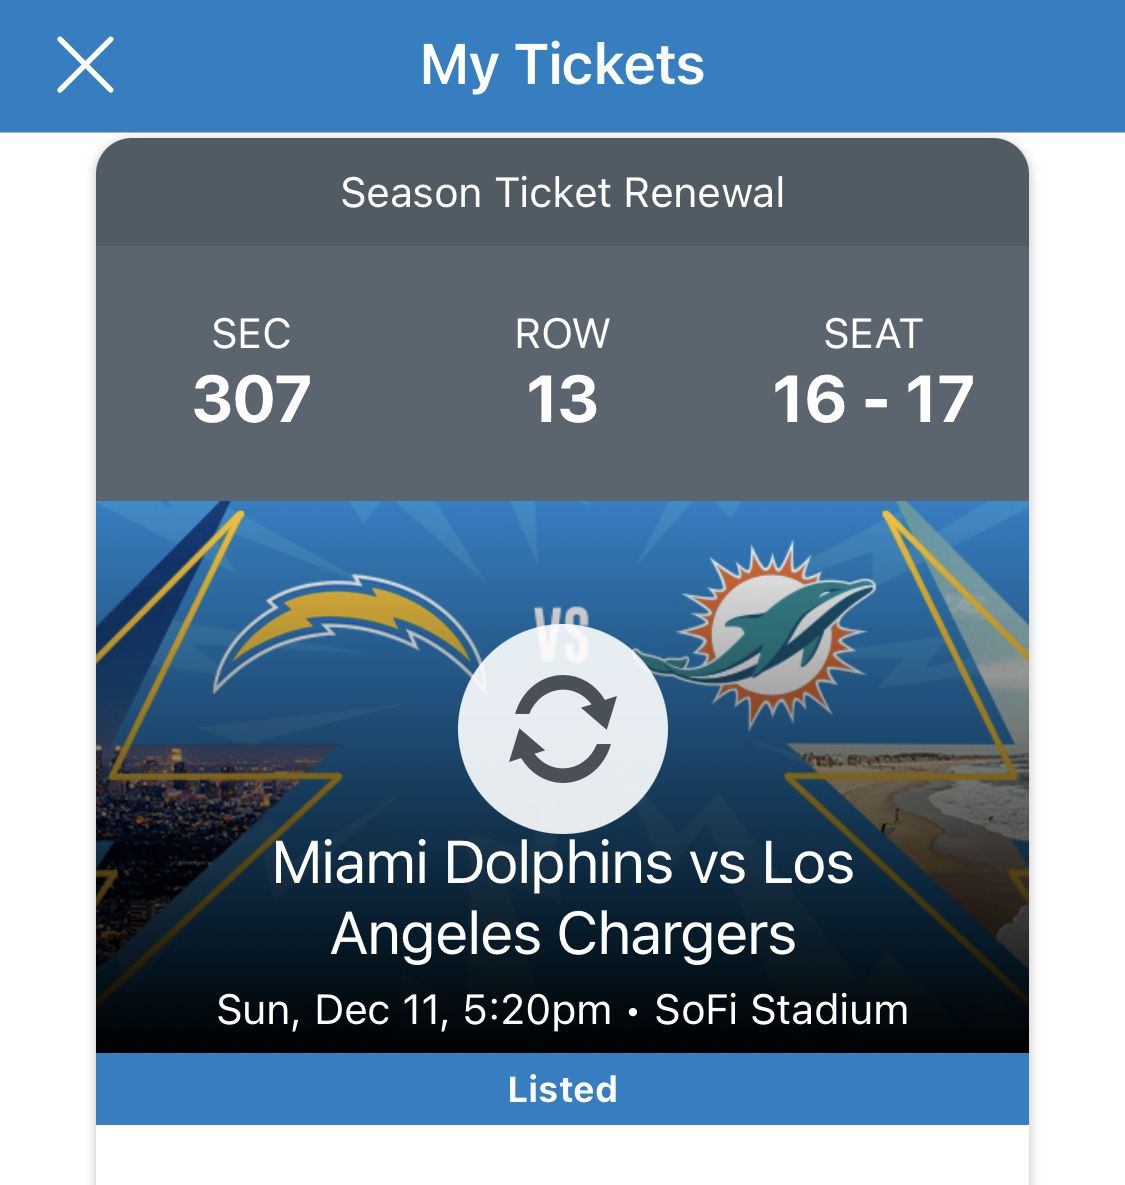 Miami dolphins @ Chargers 12/11